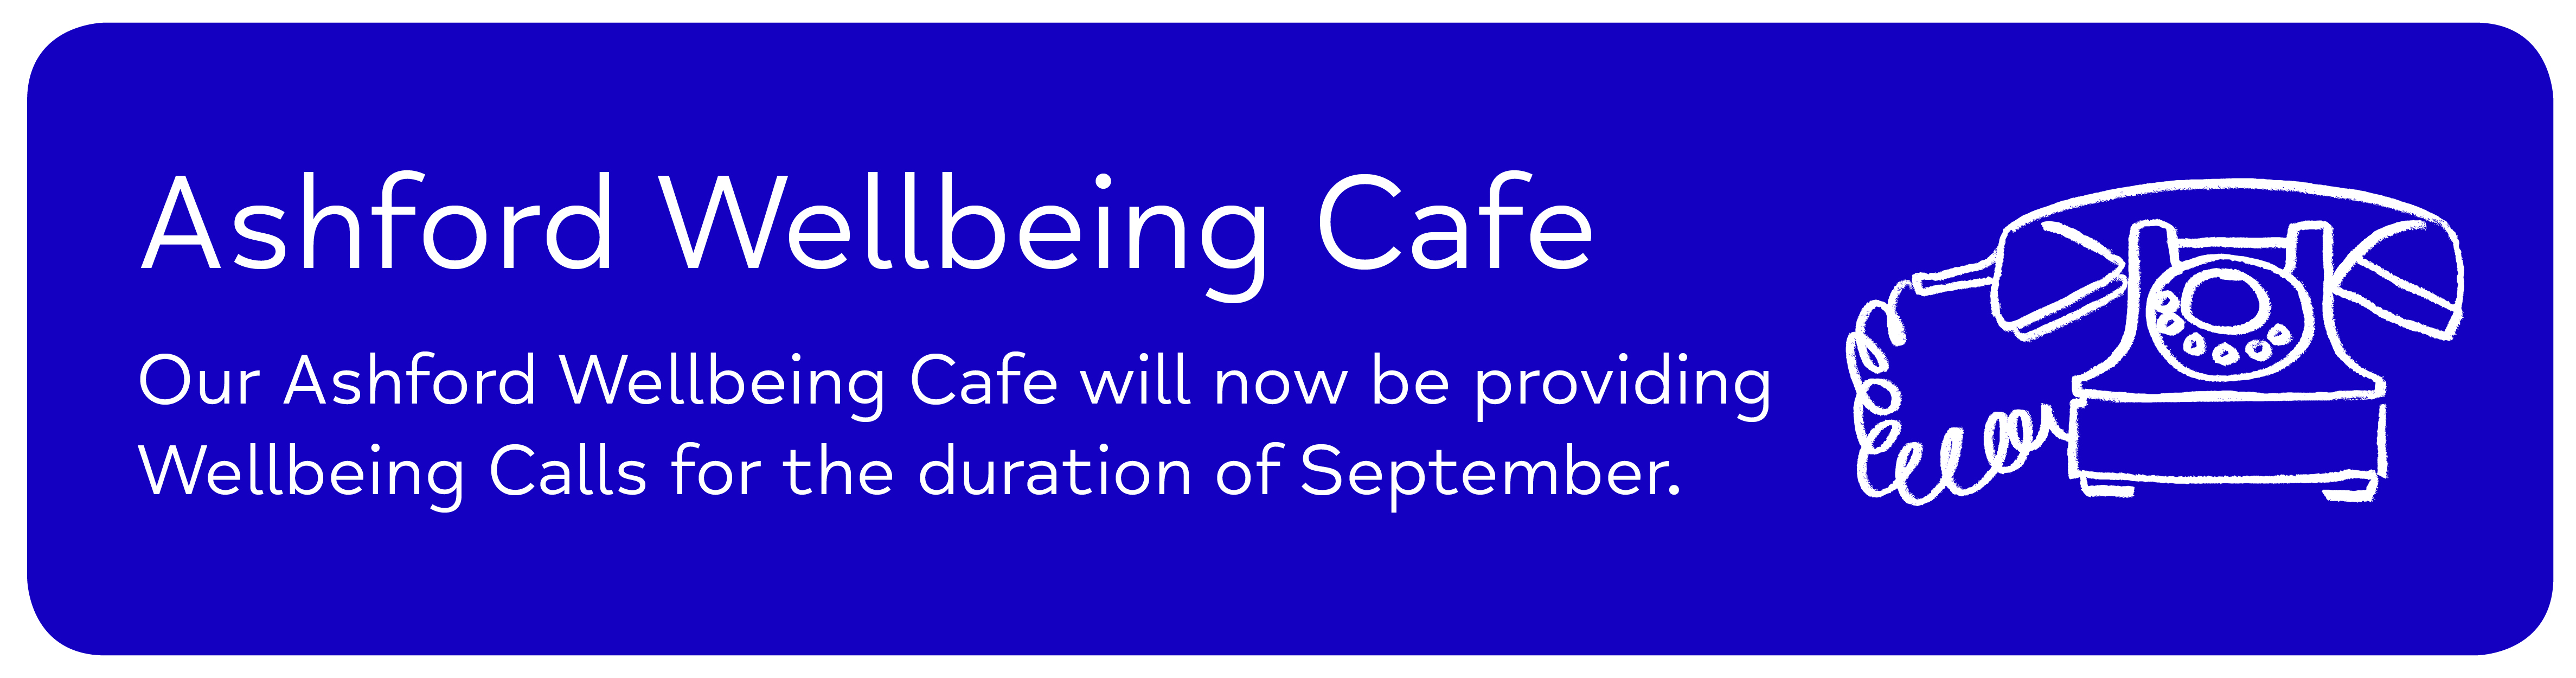 Ashford Wellbeing Cafe Our Ashford Wellbeing Cafe will now be providing   Wellbeing Calls for the duration of September.